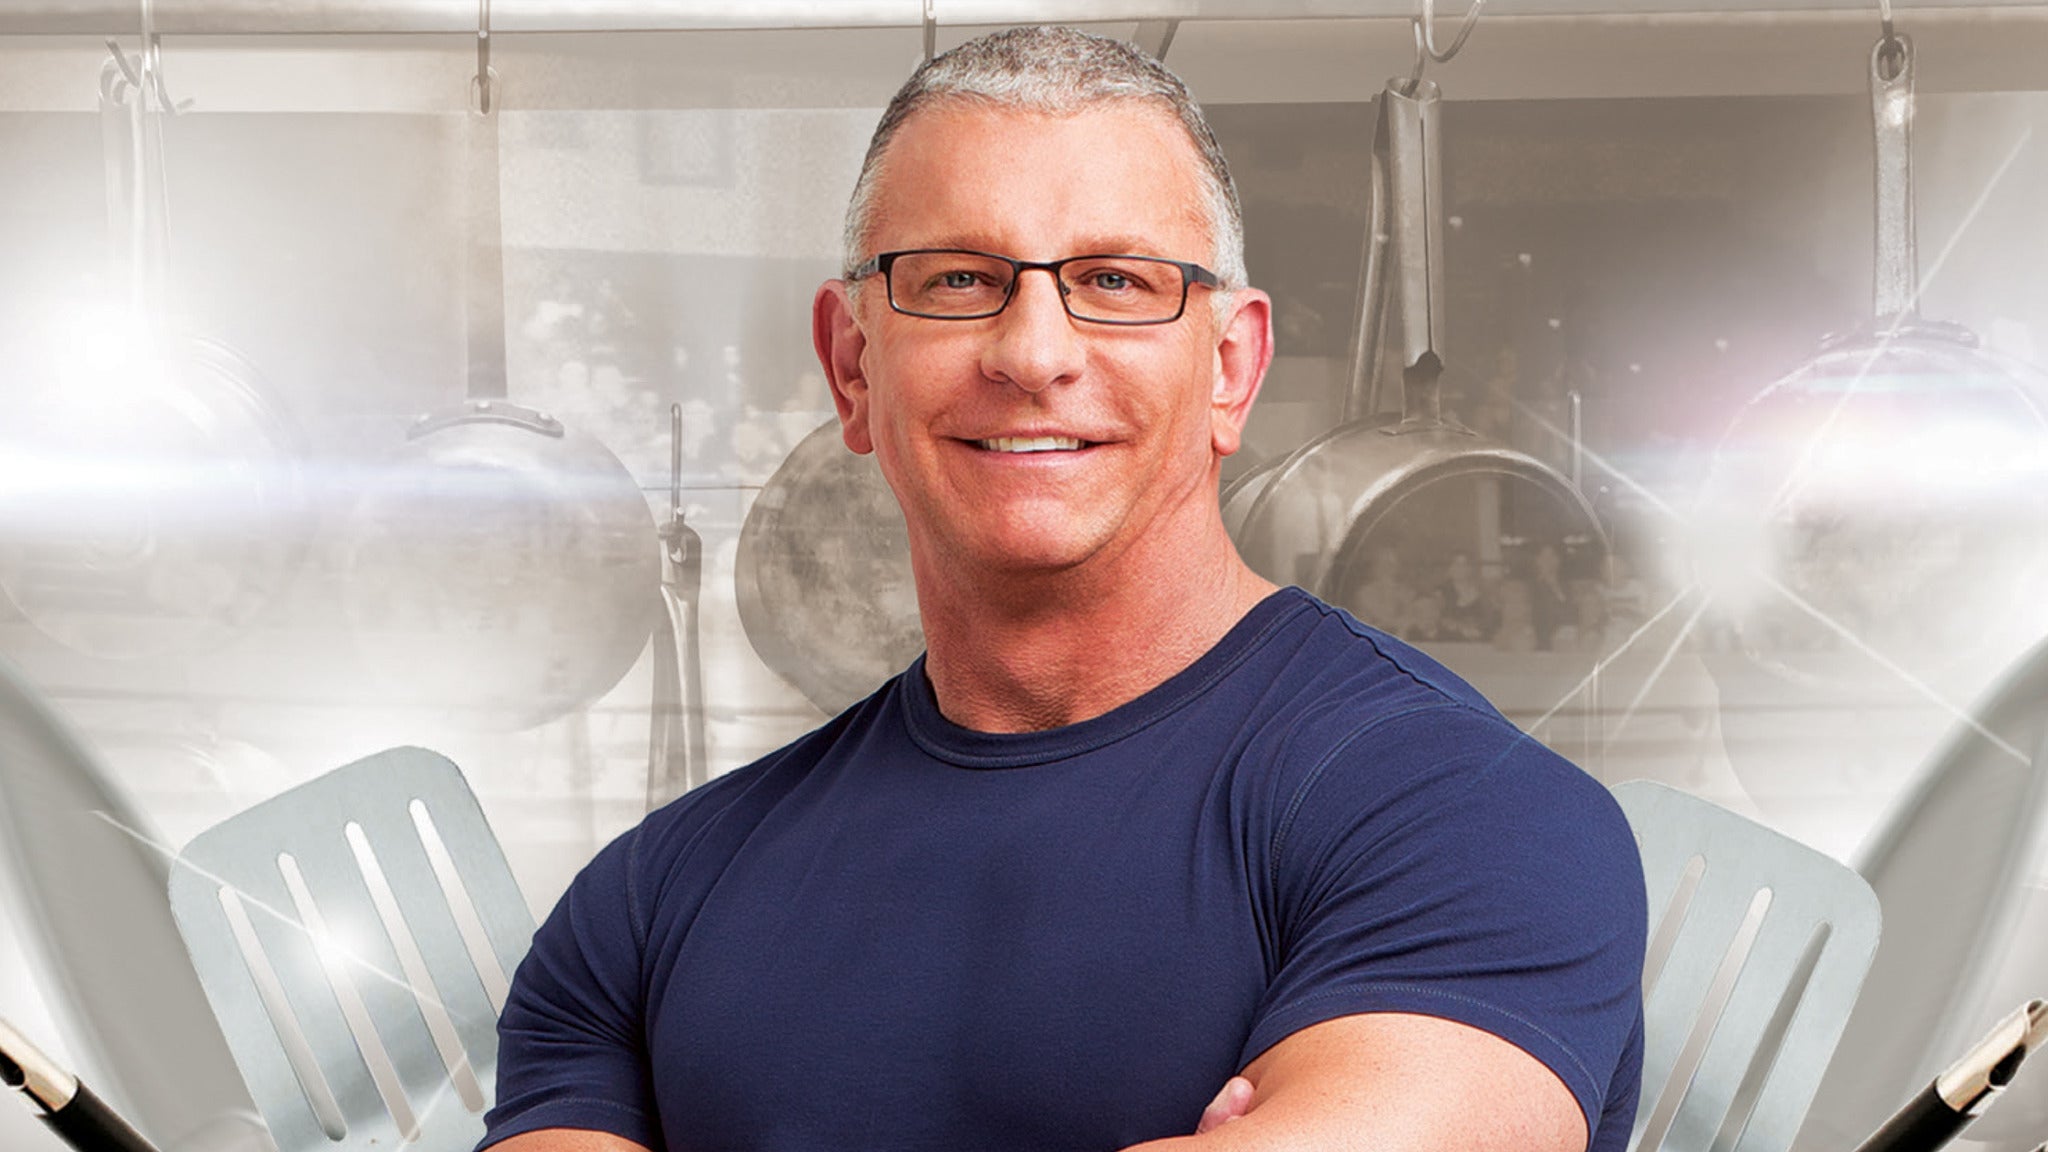 Chef Robert Irvine Live! in Charles Town promo photo for Artist presale offer code